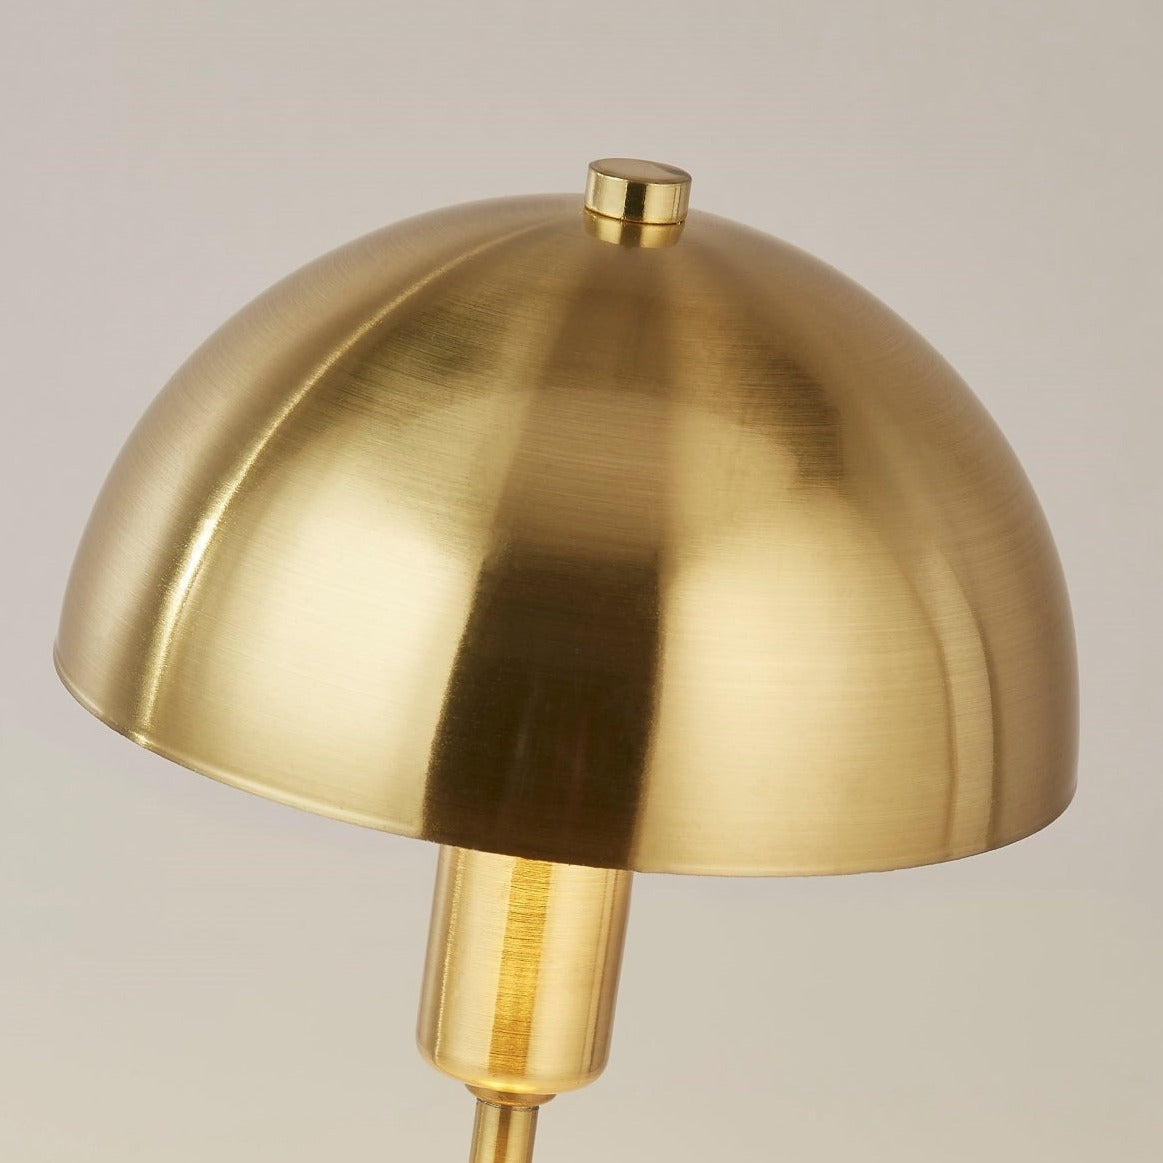 Our Nellie table lamp is a strong visual addition to your space with its distinctive dome-shaped shade and metal frame. Thanks to its brushed gold brass metal finish, it will suit both modern and traditional homes and commercial properties. Light reflects off the shade to enhance a warm and inviting glow.